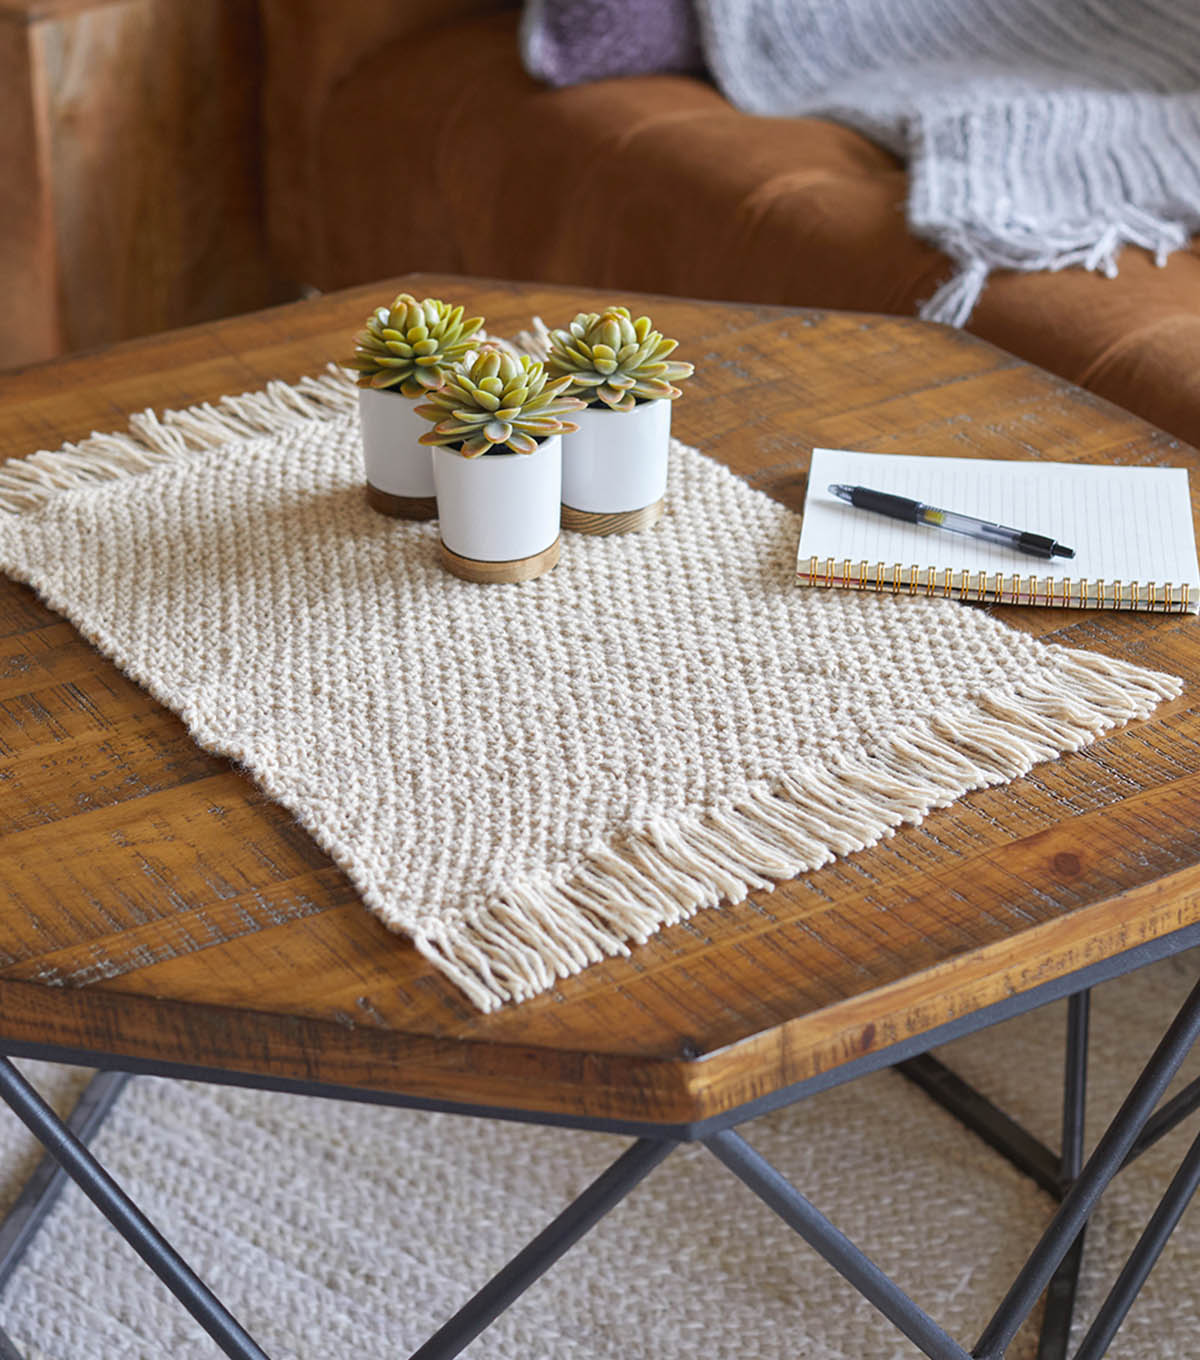 How To Make a Fringed Plant Mat | JOANN